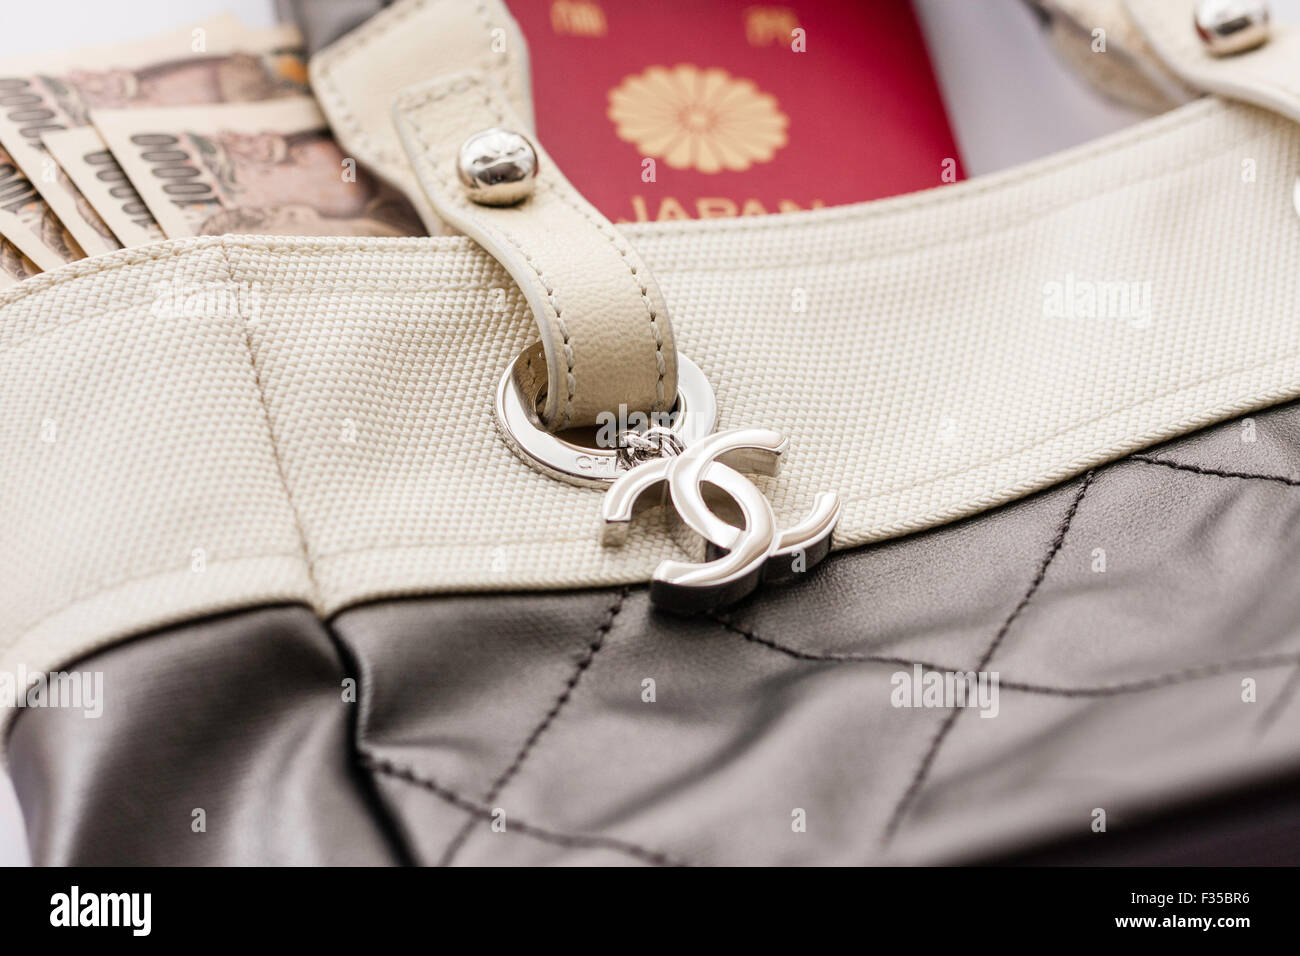 Close up detail of a brand Chanel name designer bag with it's